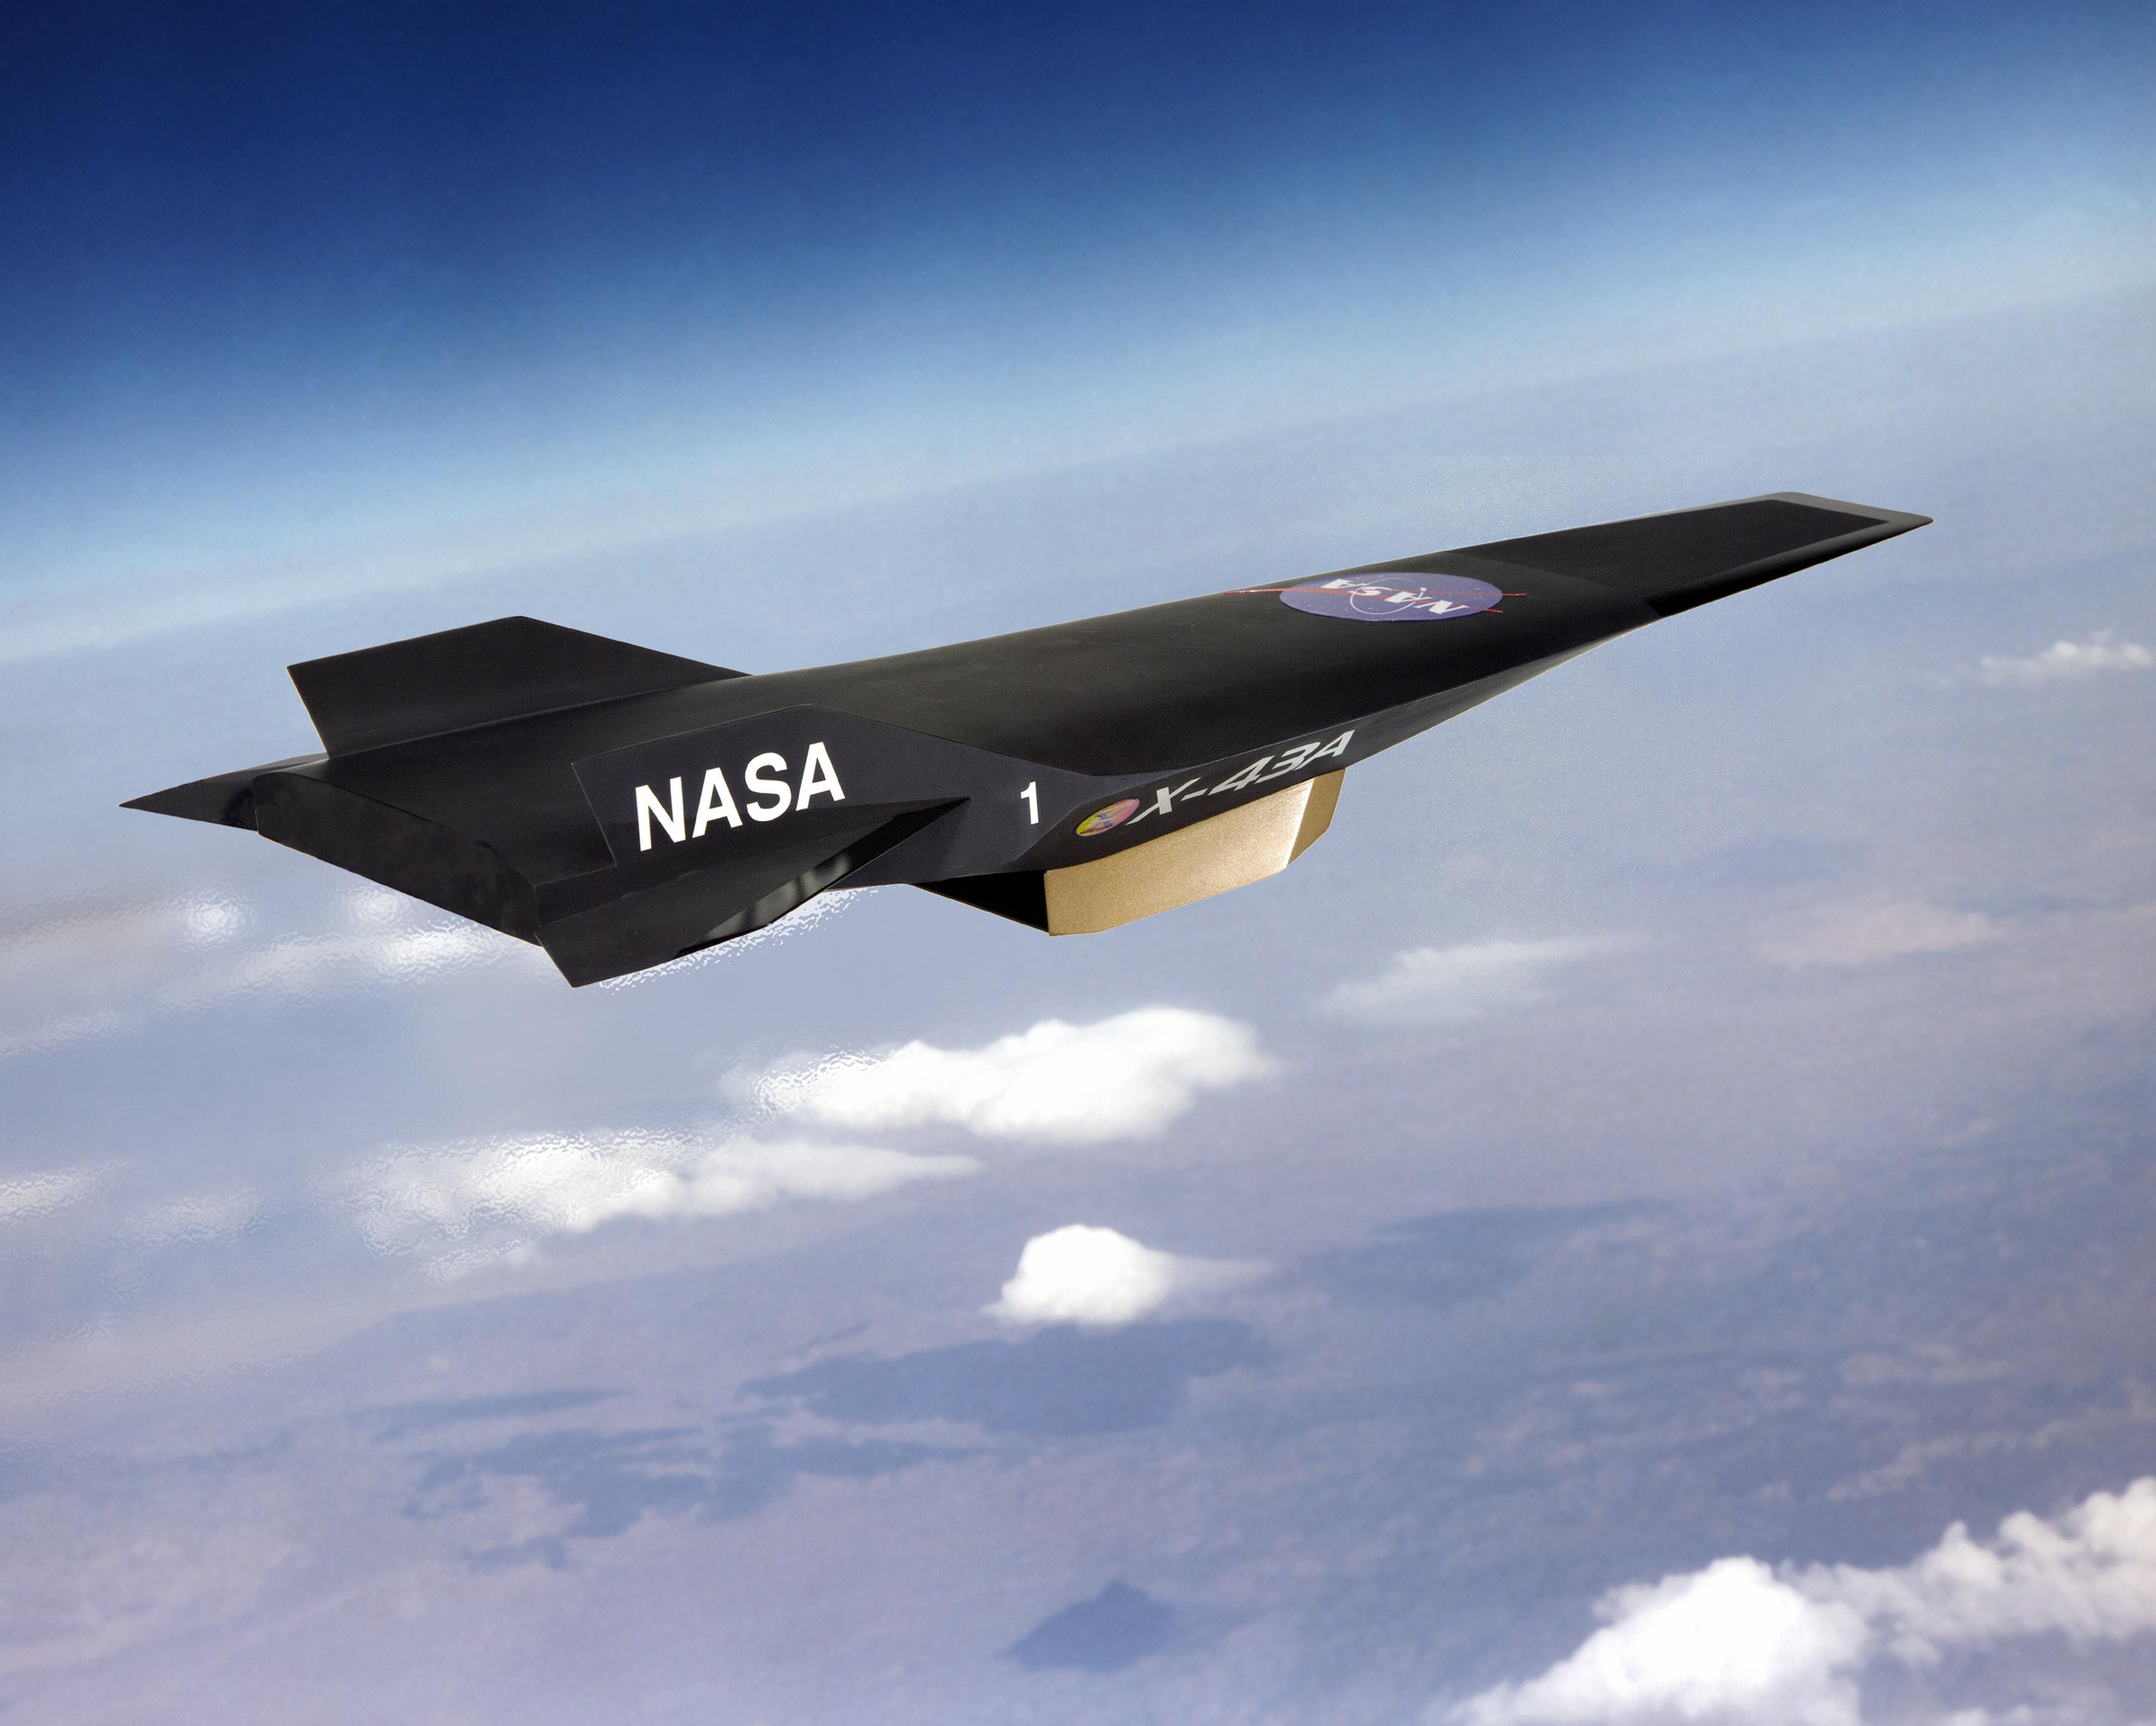 AEDC team members recall their time spent supporting NASA's X-43A project